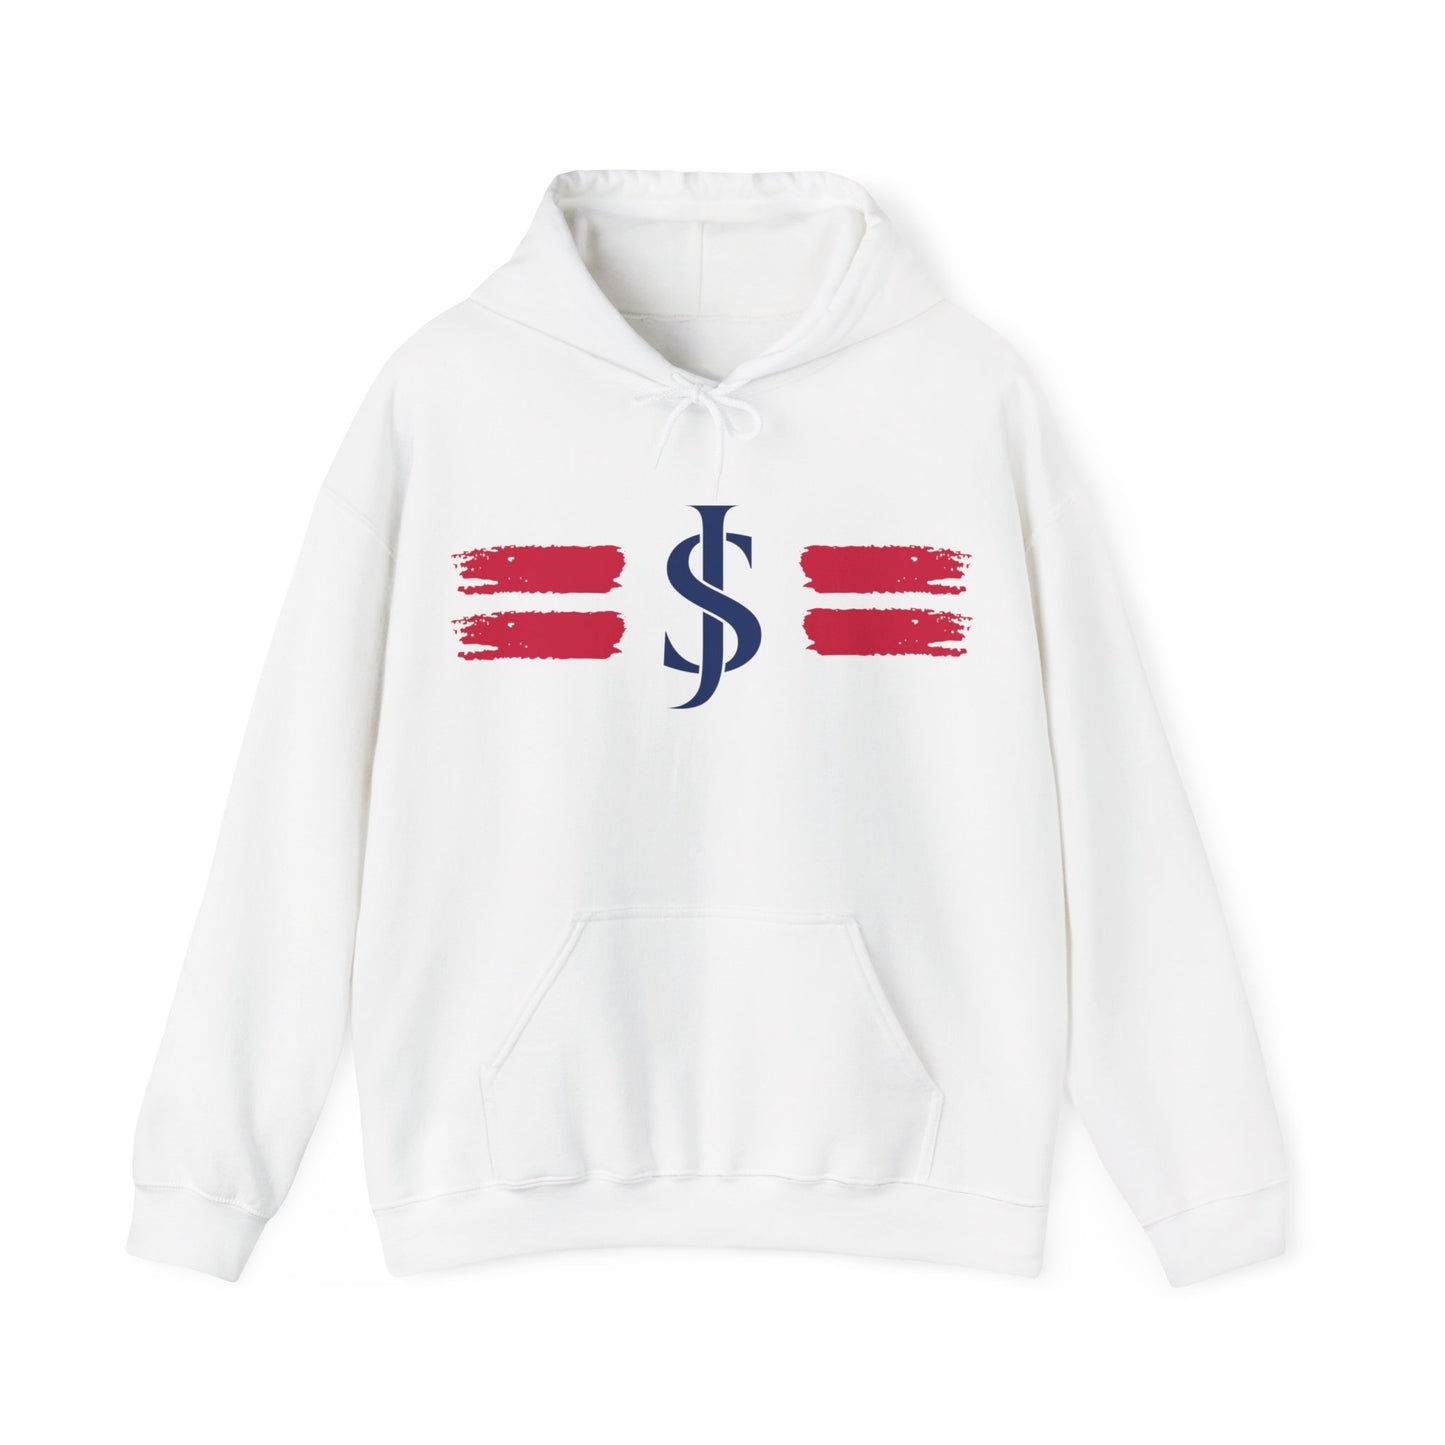 Jeremiah Smith Team Colors Hoodie